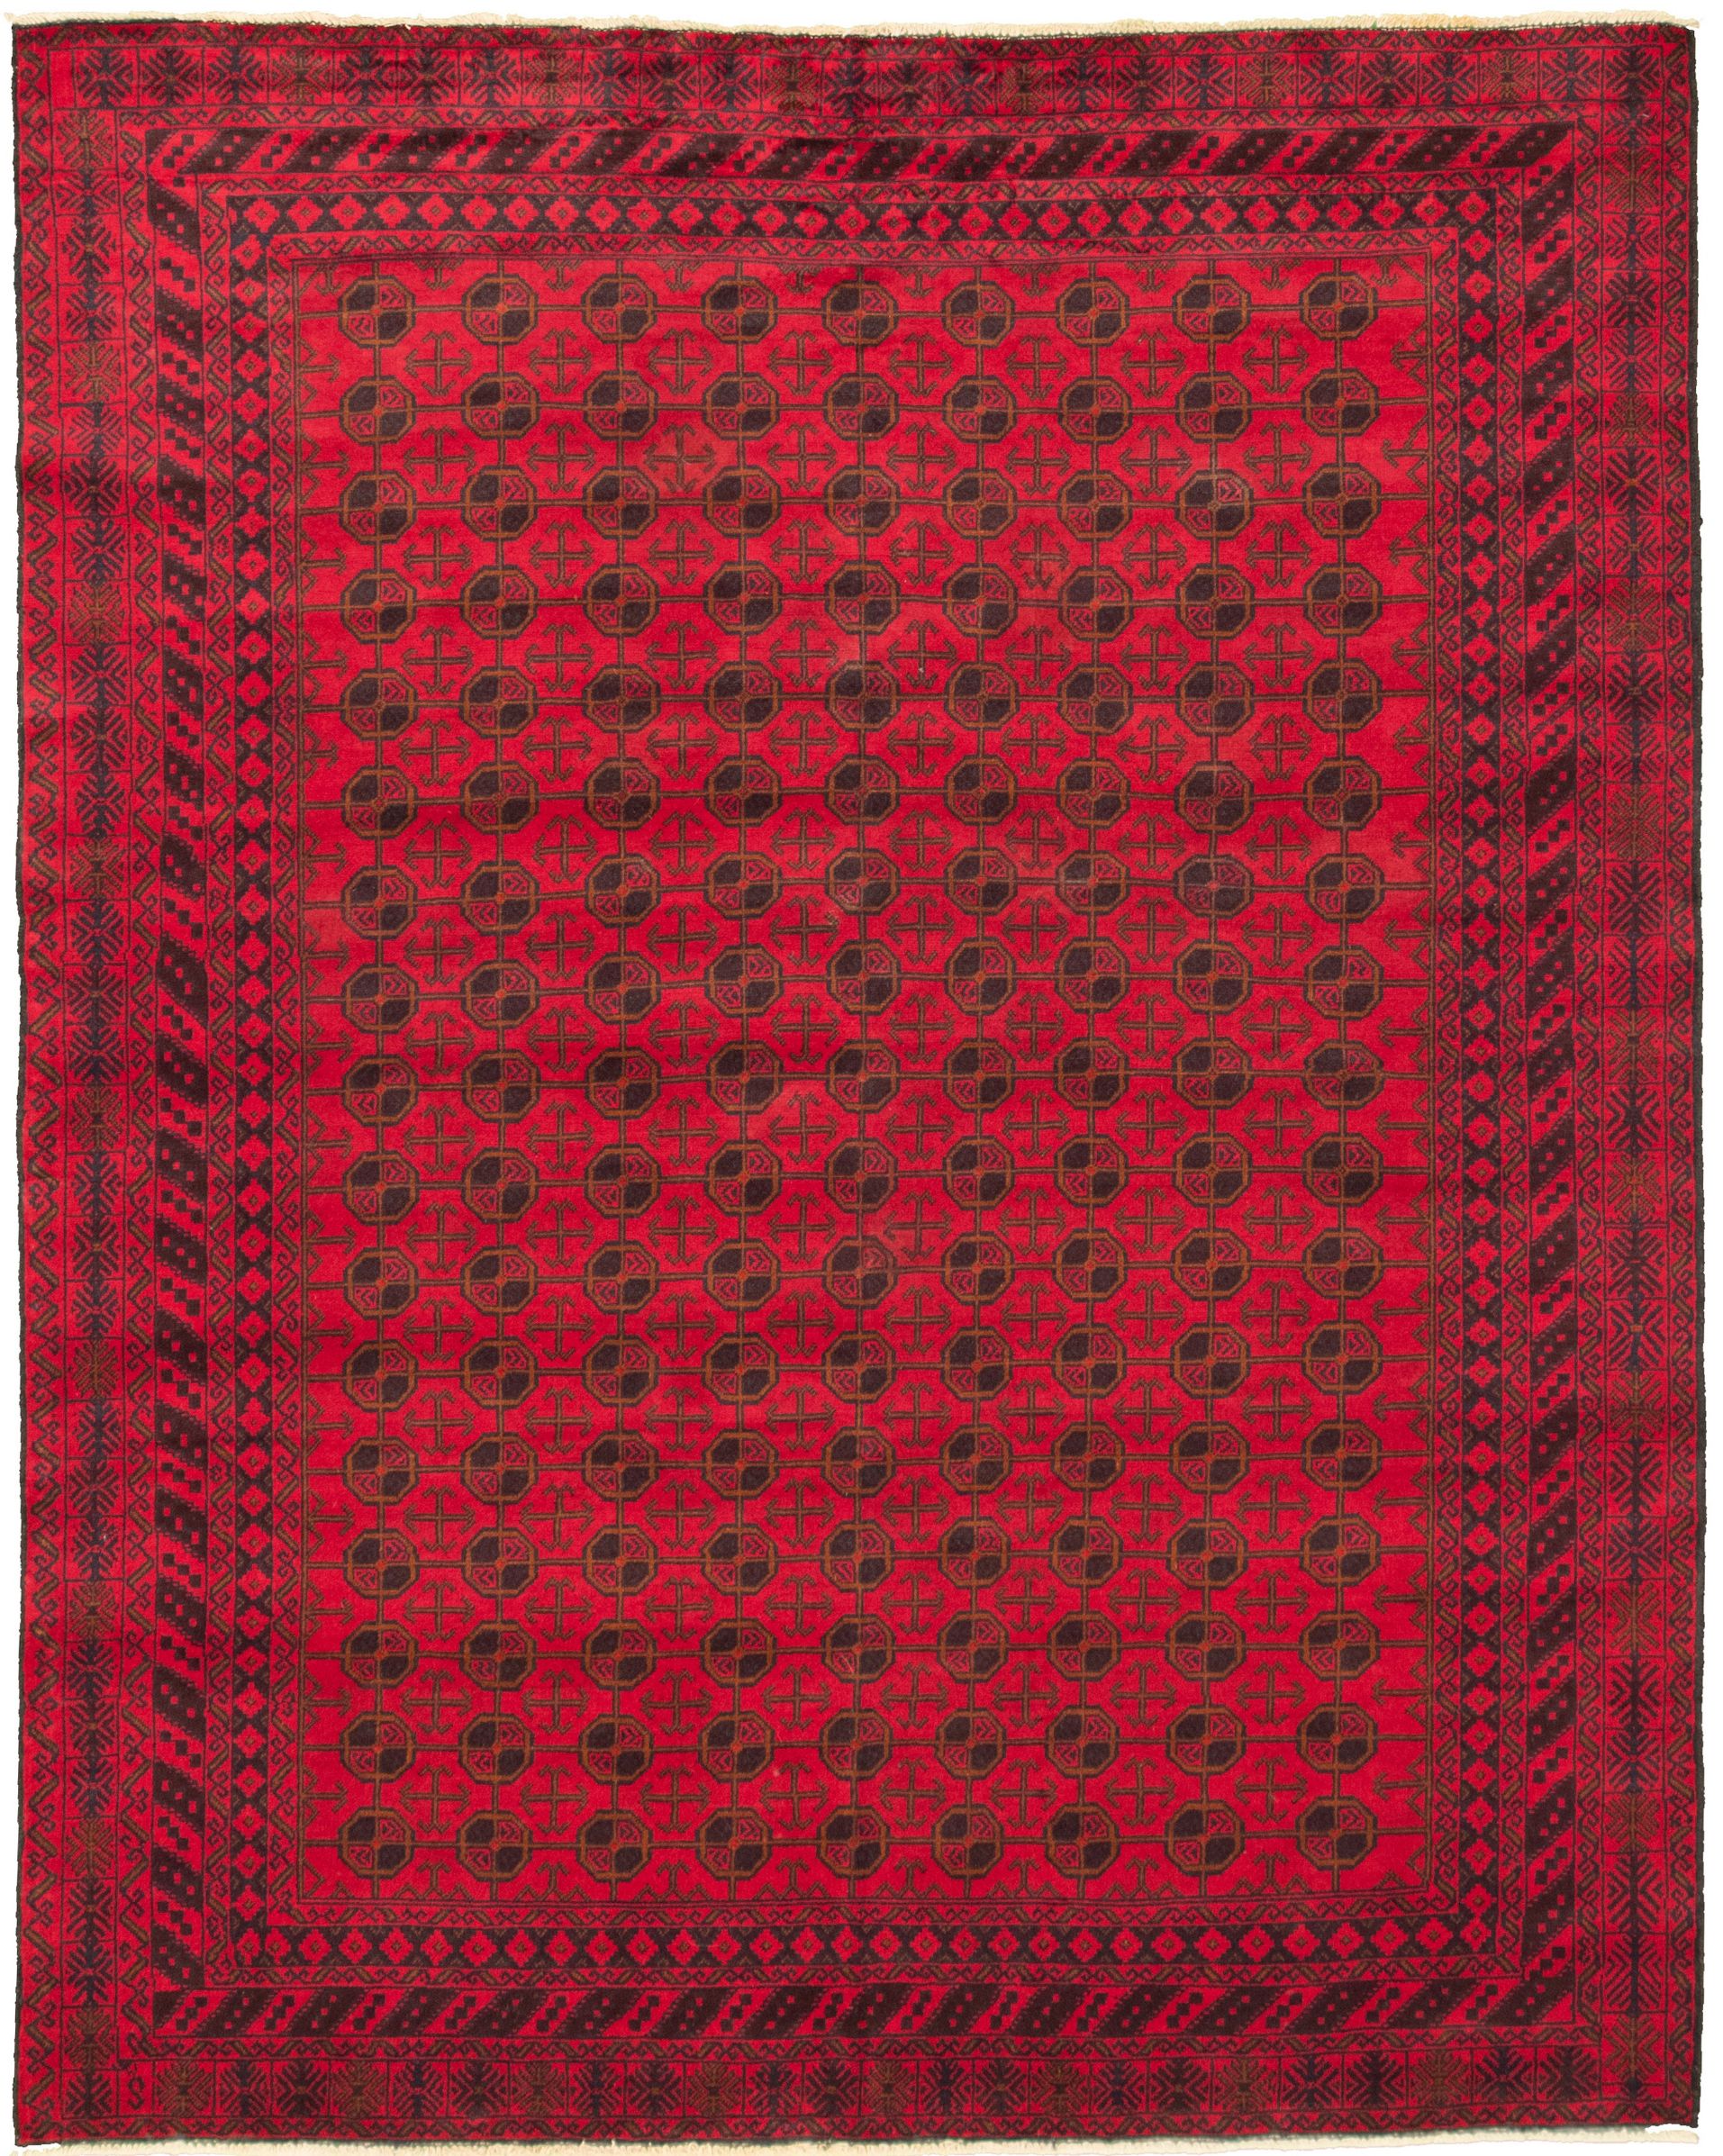 Hand-knotted Teimani Dark Red Wool Rug 6'11" x 8'7" Size: 6'11" x 8'7"  